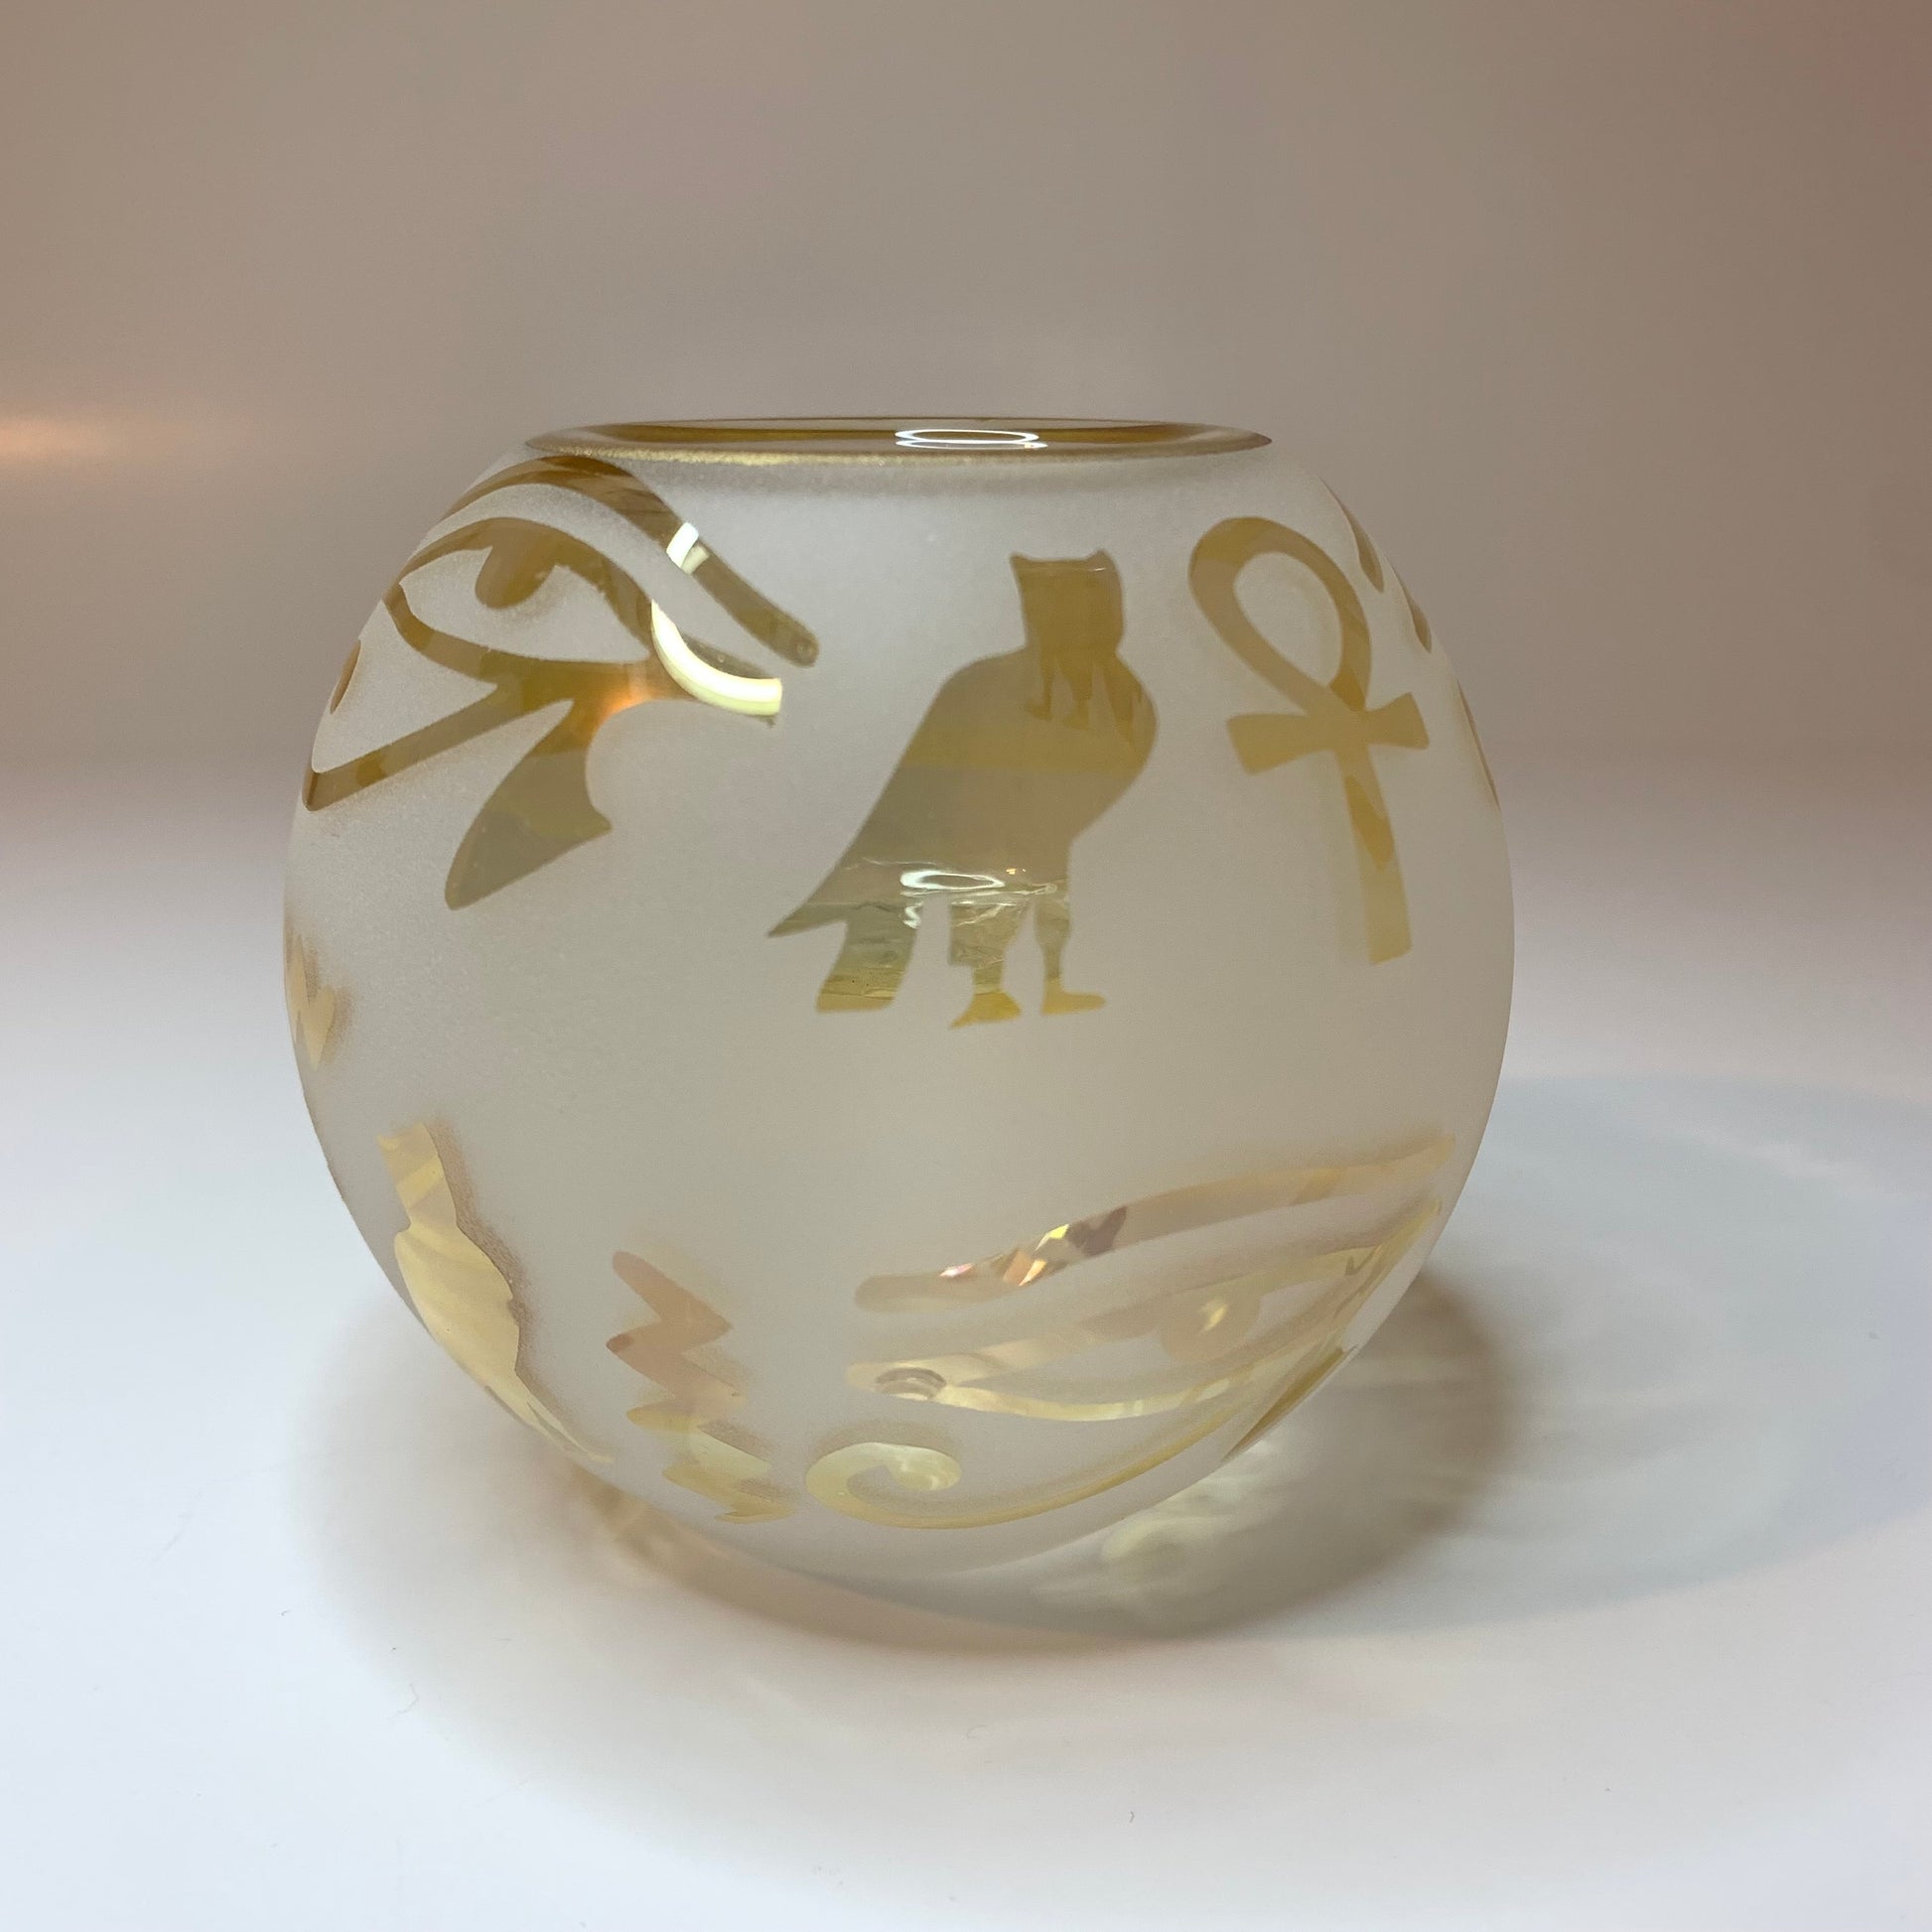 Blown Glass Candle Holder - Hieroglyphics in Yellow